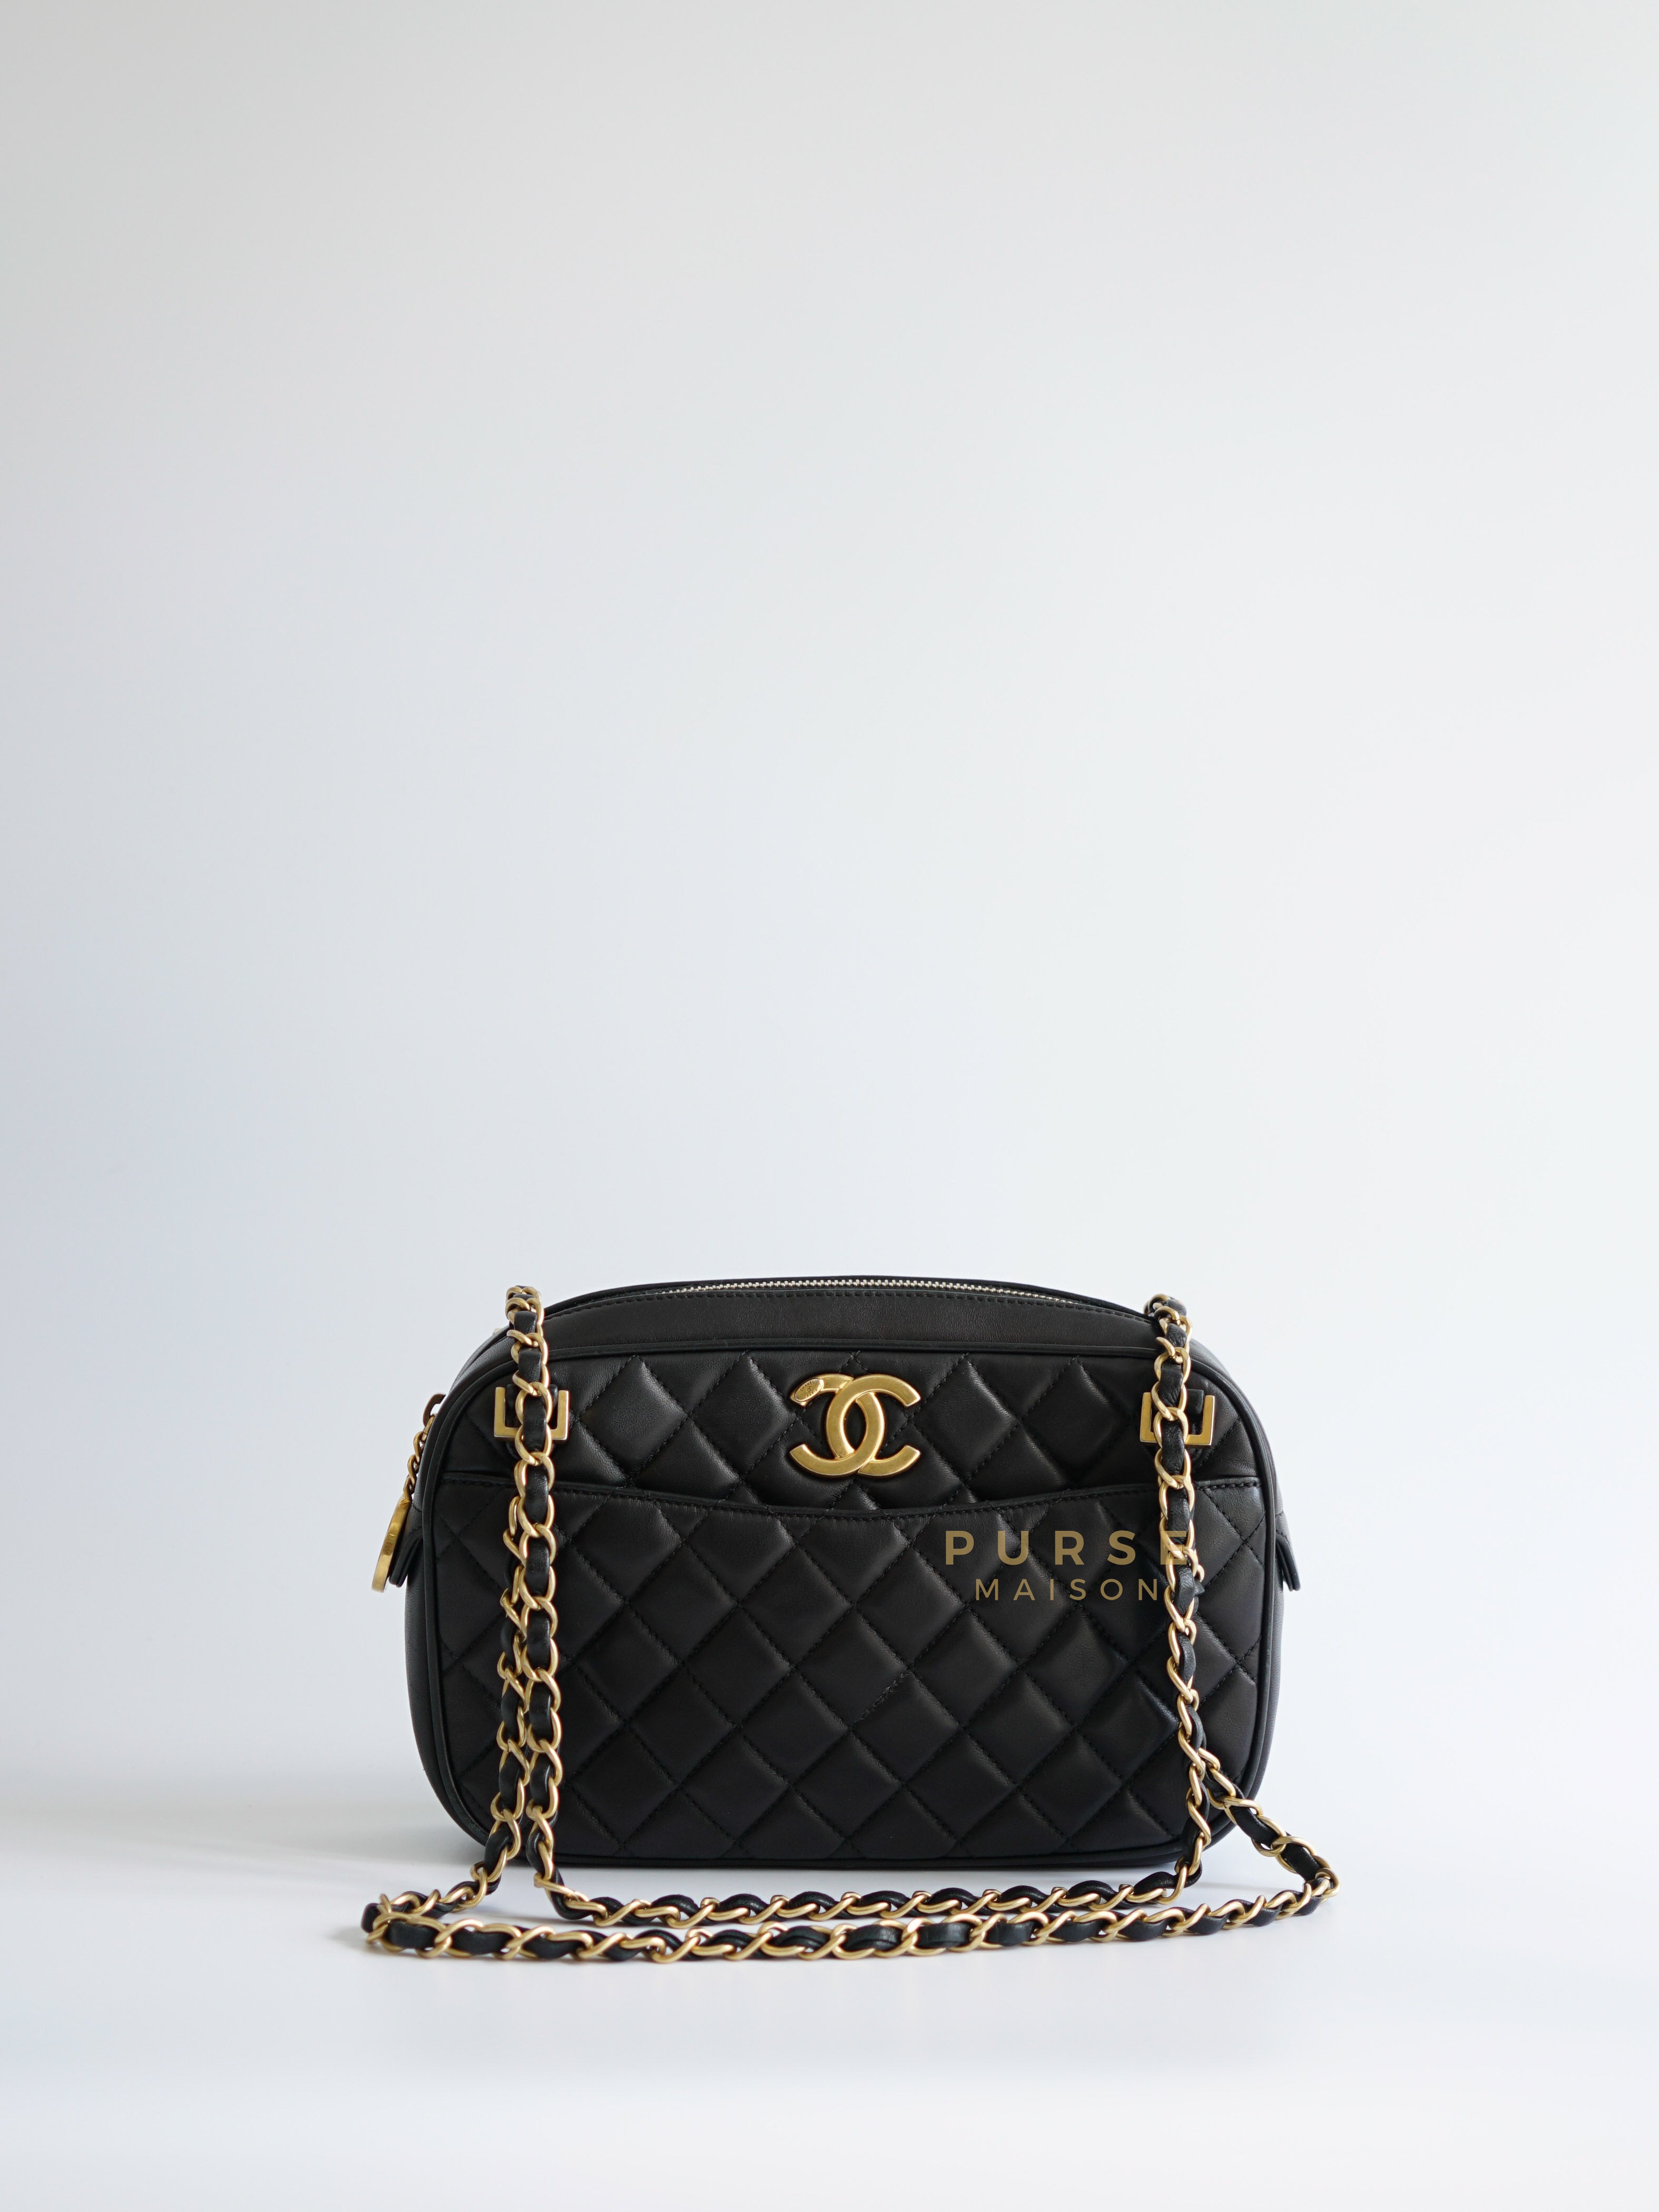 Camera Bag in Black Quilted Lambskin & Aged Gold Hardware Series 17 | Purse Maison Luxury Bags Shop